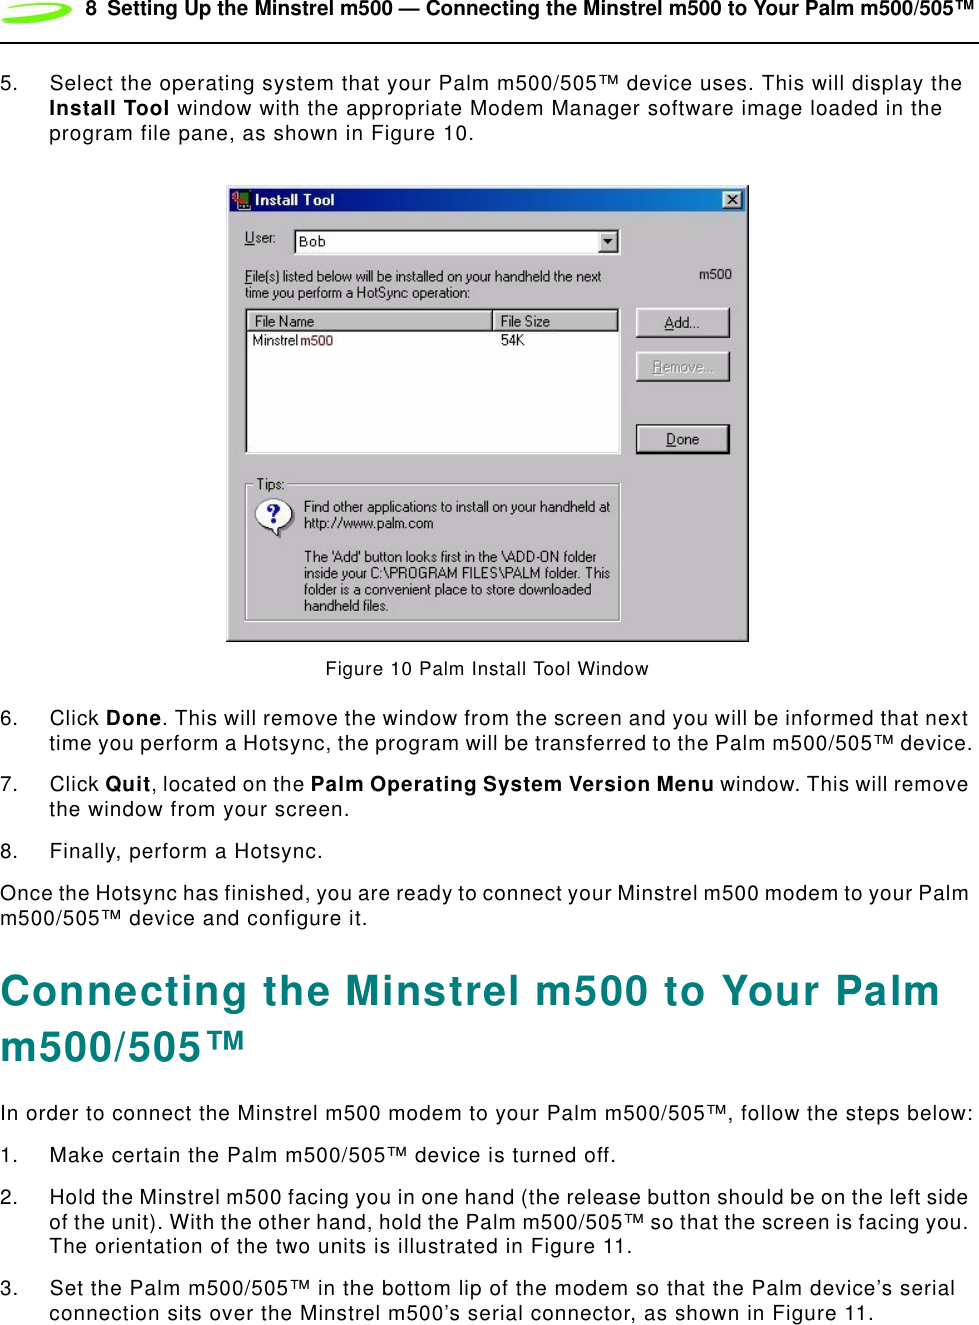 8 Setting Up the Minstrel m500 — Connecting the Minstrel m500 to Your Palm m500/505™5. Select the operating system that your Palm m500/505™ device uses. This will display the Install Tool window with the appropriate Modem Manager software image loaded in the program file pane, as shown in Figure 10.Figure 10 Palm Install Tool Window6. Click Done. This will remove the window from the screen and you will be informed that next time you perform a Hotsync, the program will be transferred to the Palm m500/505™ device.7. Click Quit, located on the Palm Operating System Version Menu window. This will remove the window from your screen.8. Finally, perform a Hotsync.Once the Hotsync has finished, you are ready to connect your Minstrel m500 modem to your Palm m500/505™ device and configure it.Connecting the Minstrel m500 to Your Palm m500/505™In order to connect the Minstrel m500 modem to your Palm m500/505™, follow the steps below:1. Make certain the Palm m500/505™ device is turned off.2. Hold the Minstrel m500 facing you in one hand (the release button should be on the left side of the unit). With the other hand, hold the Palm m500/505™ so that the screen is facing you. The orientation of the two units is illustrated in Figure 11.3. Set the Palm m500/505™ in the bottom lip of the modem so that the Palm device’s serial connection sits over the Minstrel m500’s serial connector, as shown in Figure 11.